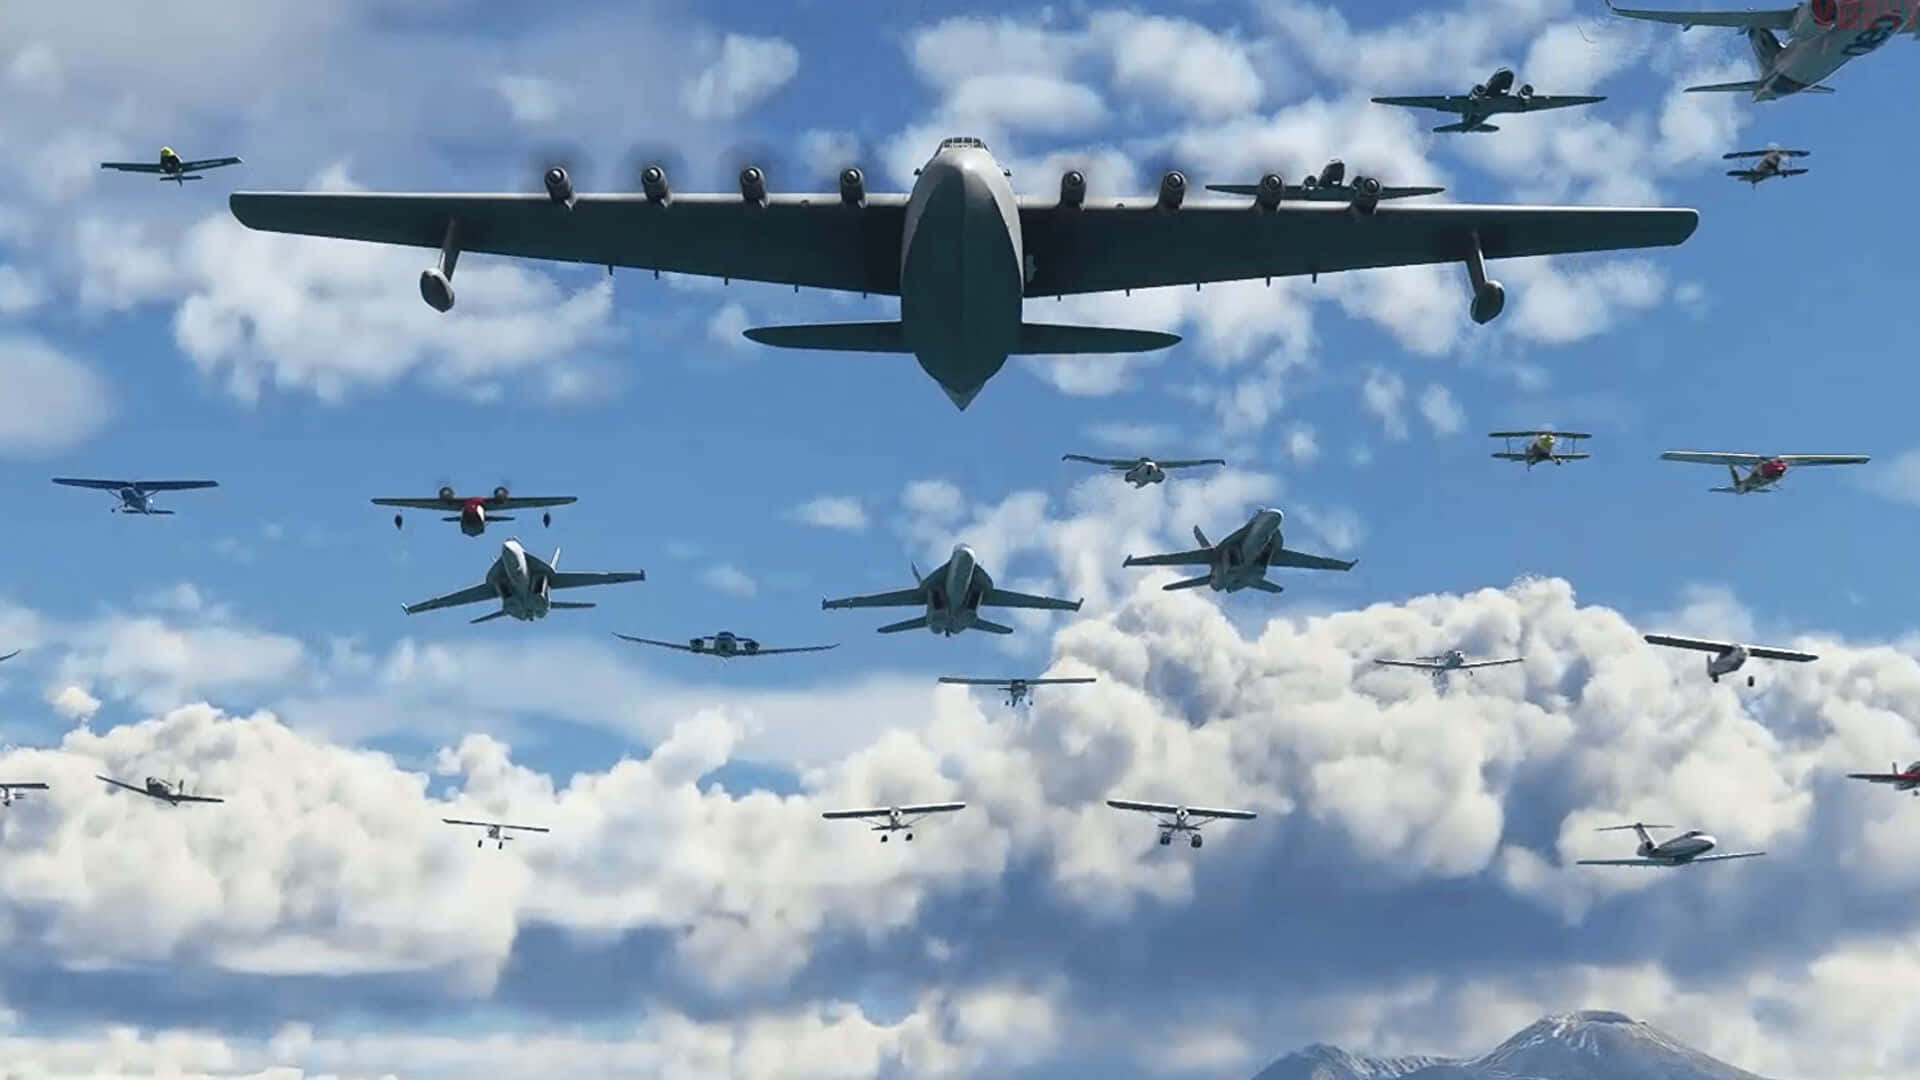 A Group Of Planes Flying In The Sky